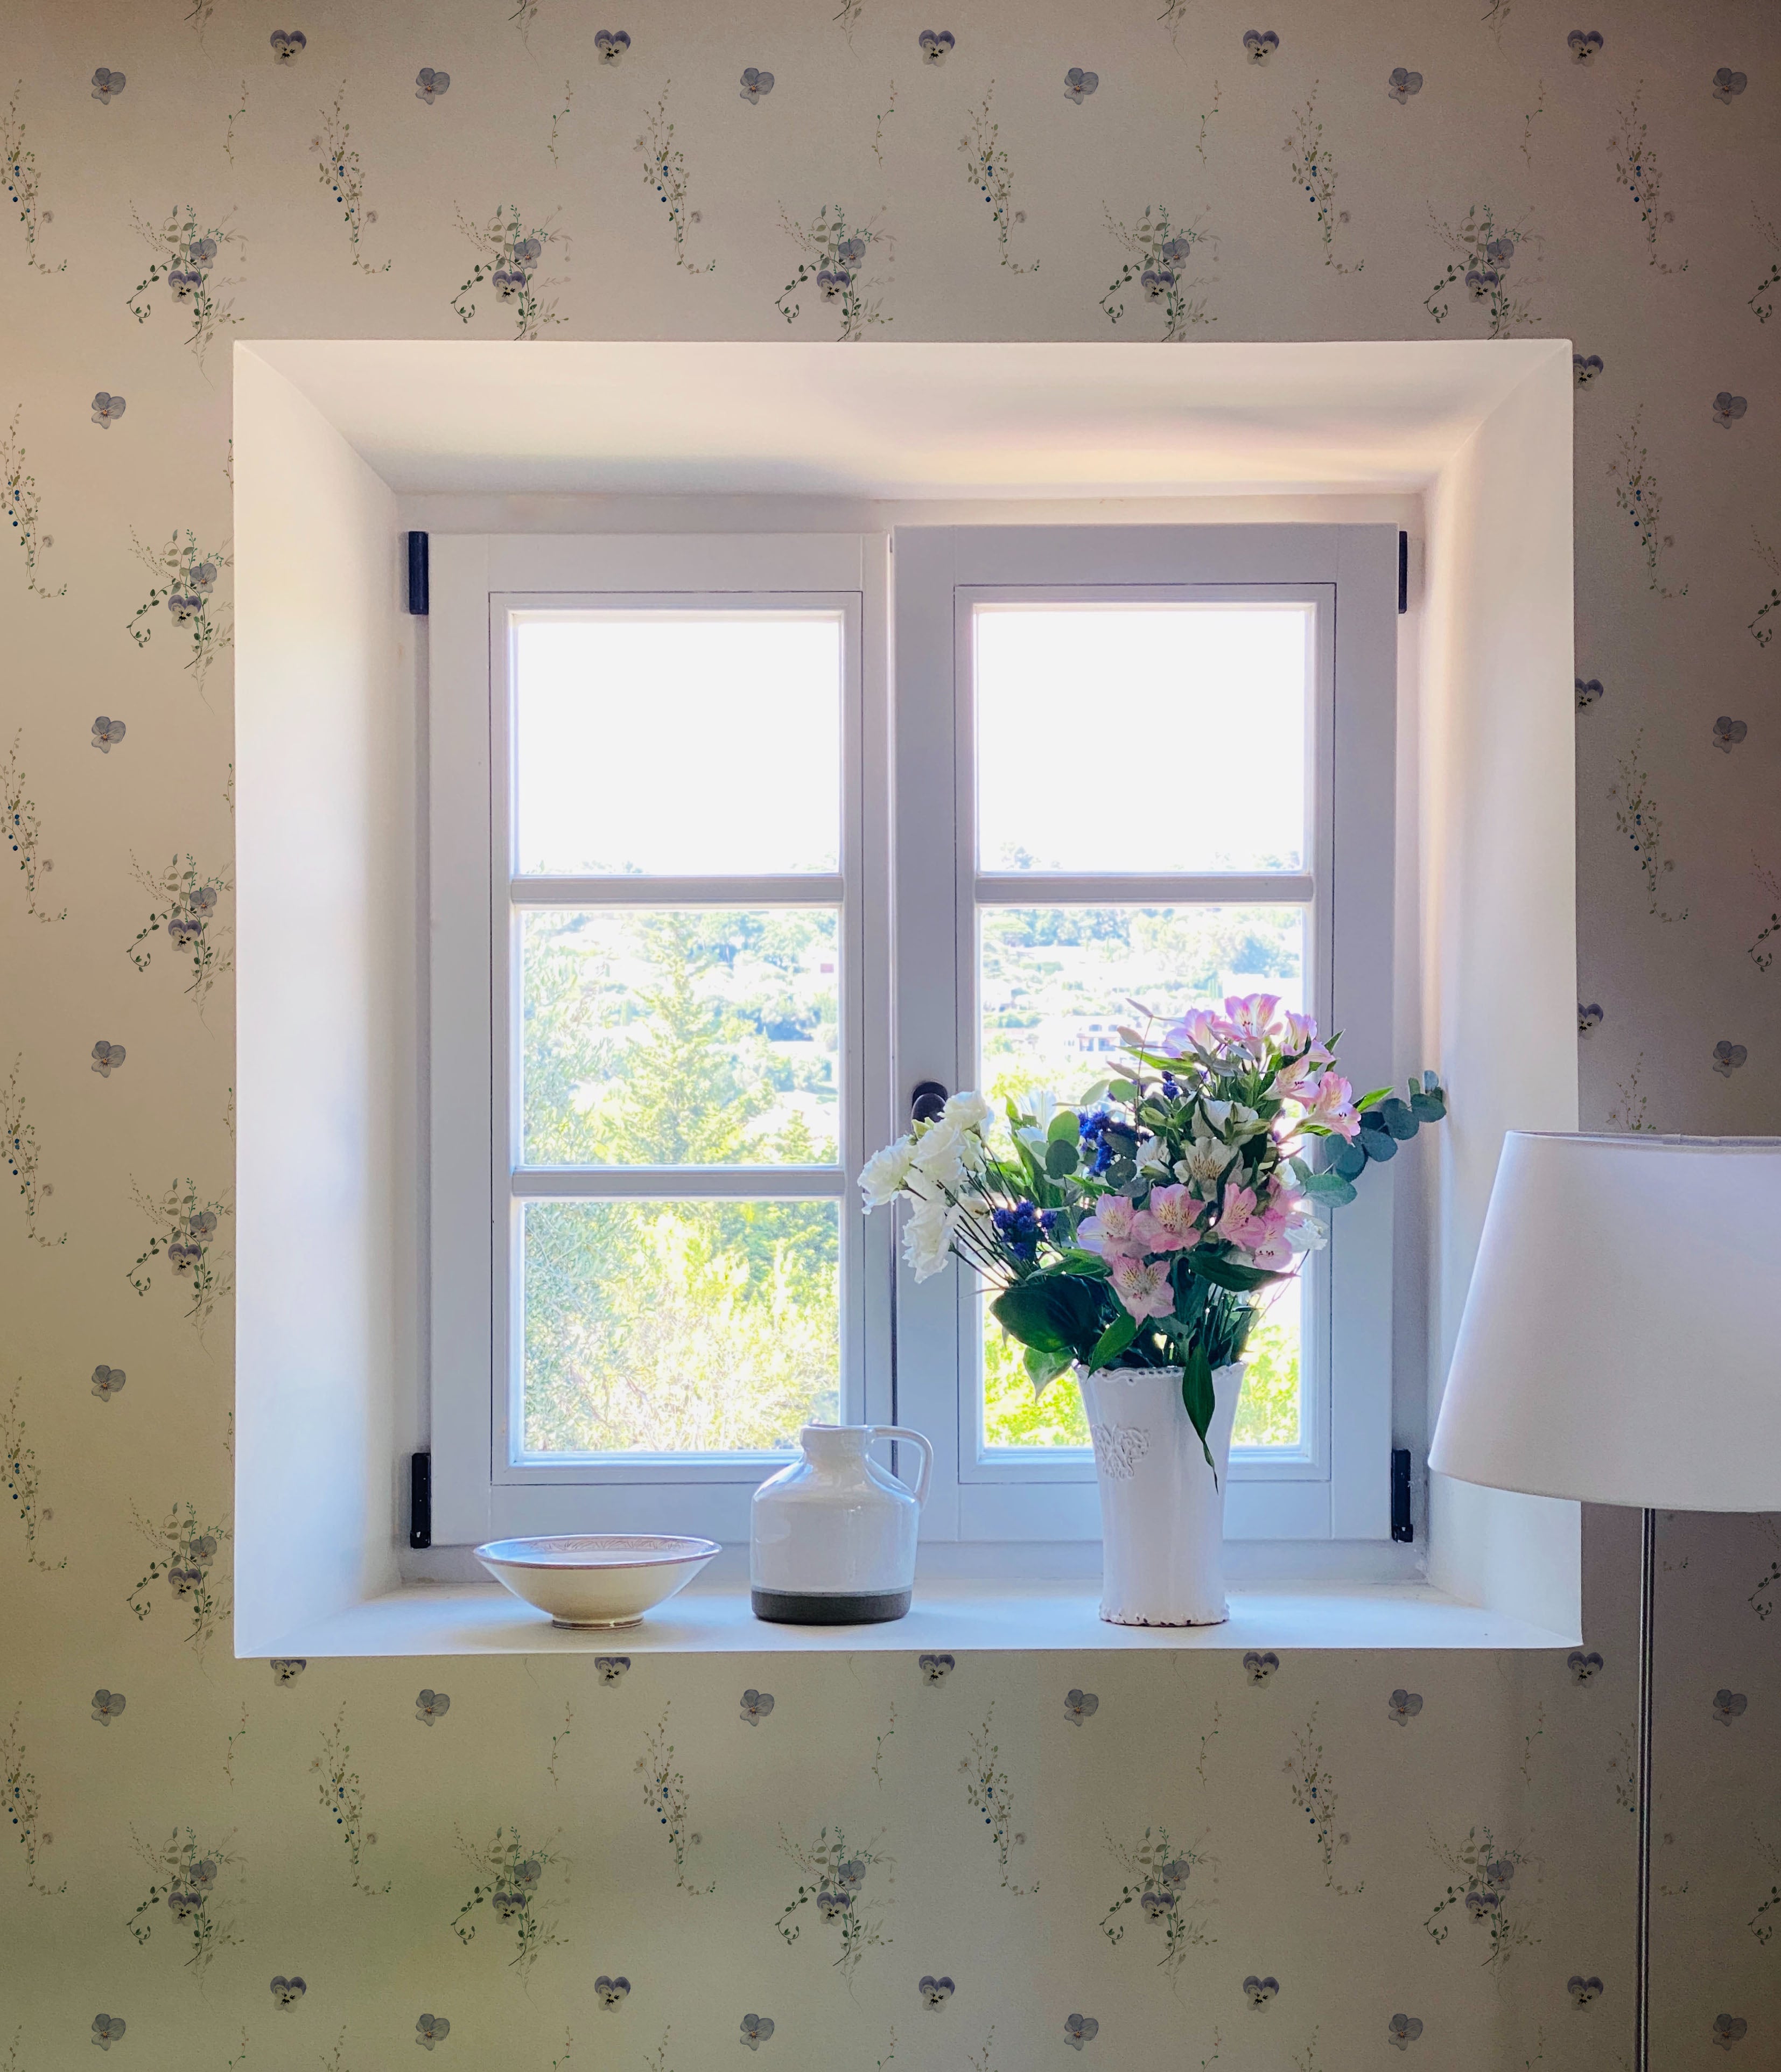 The Delicate Blue Wildflower Wallpaper accents a bright window area, bringing the gentle beauty of a wildflower meadow indoors. A vase with fresh flowers on the windowsill echoes the wallpaper's floral motif.